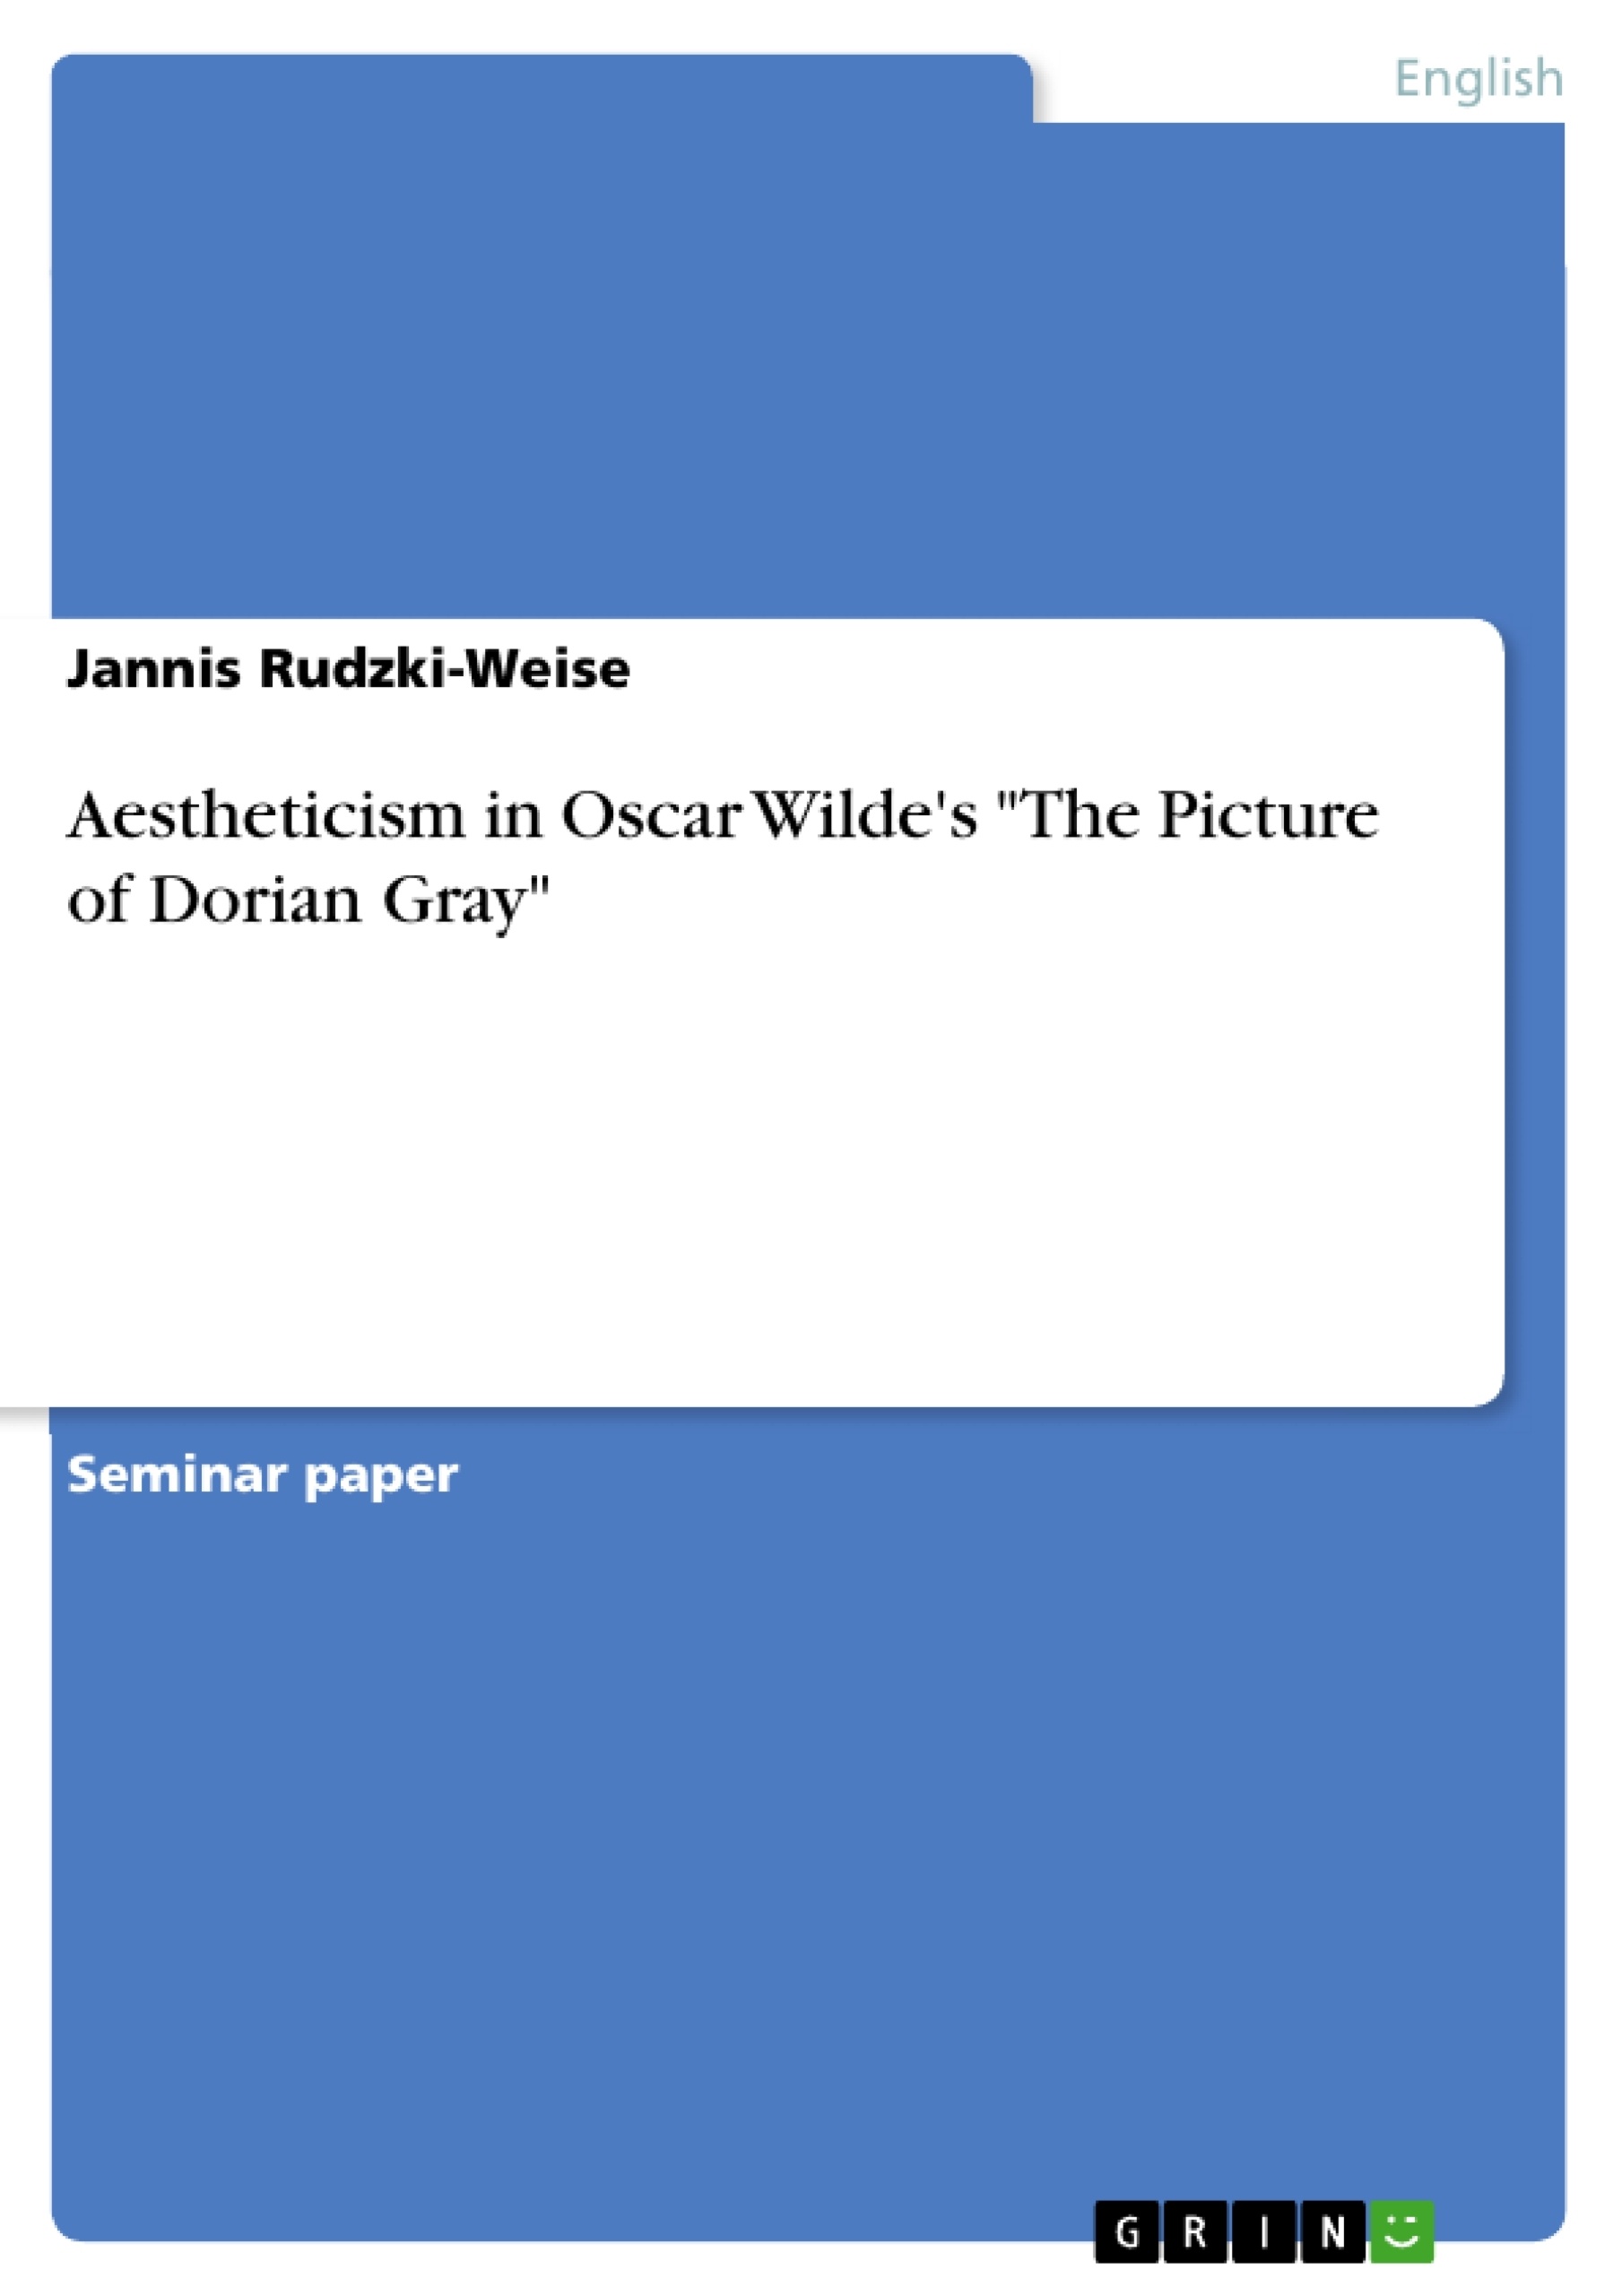 Title: Aestheticism in Oscar Wilde's "The Picture of Dorian Gray"